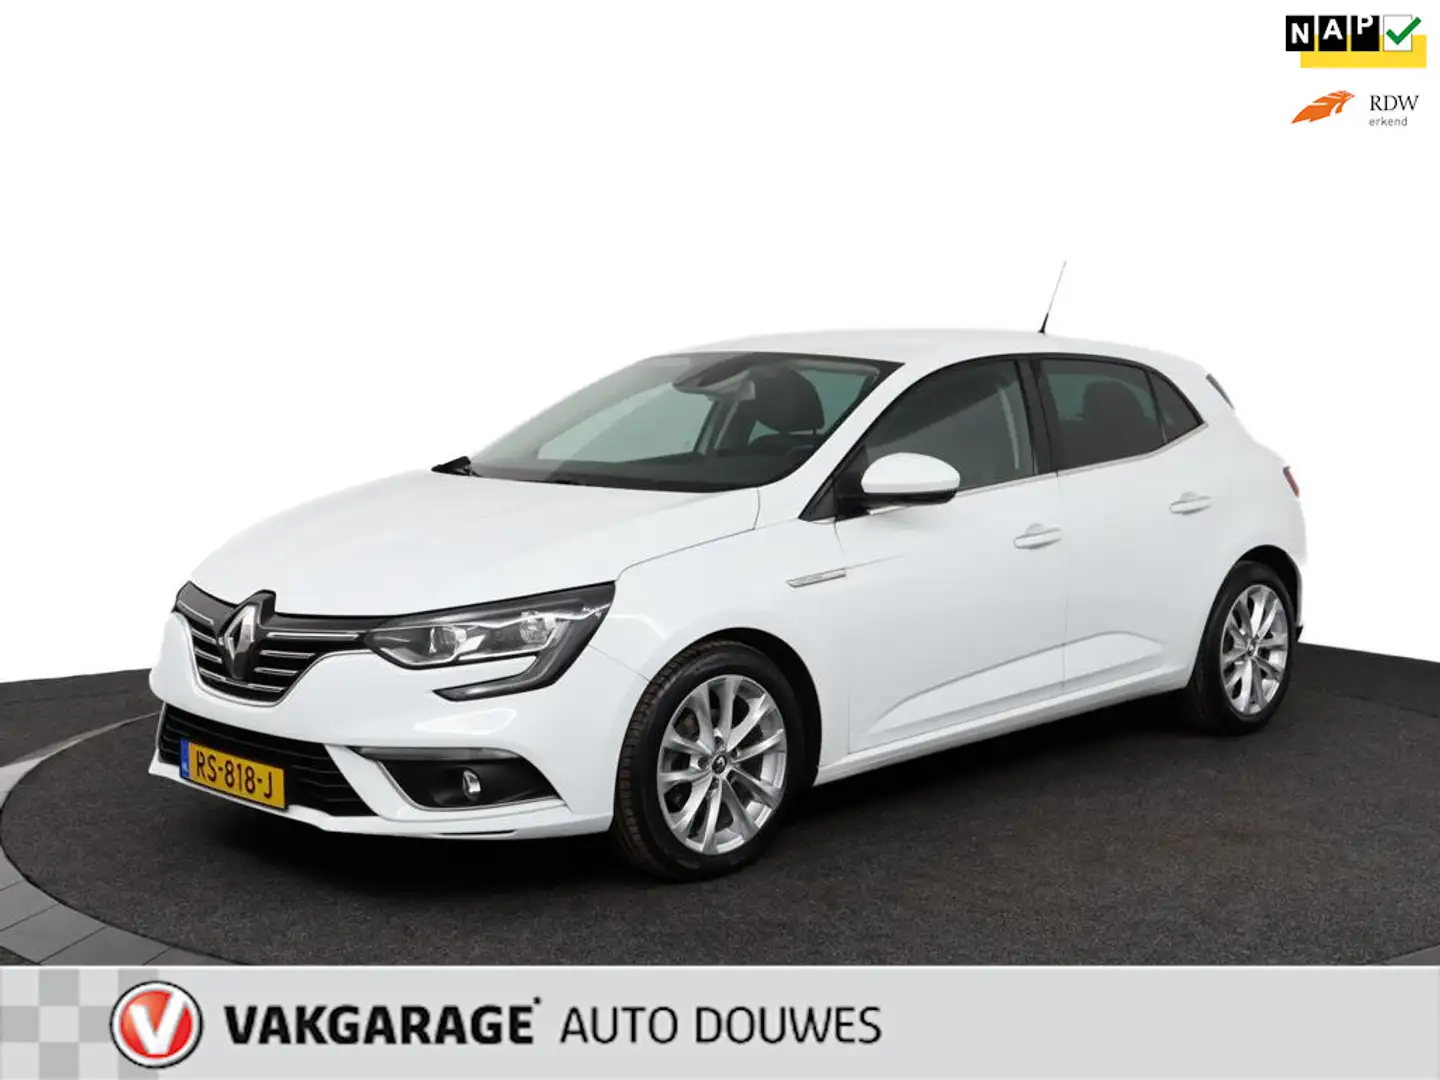 Renault Megane 1.2 TCe GT-Line (Automaat) White - 1